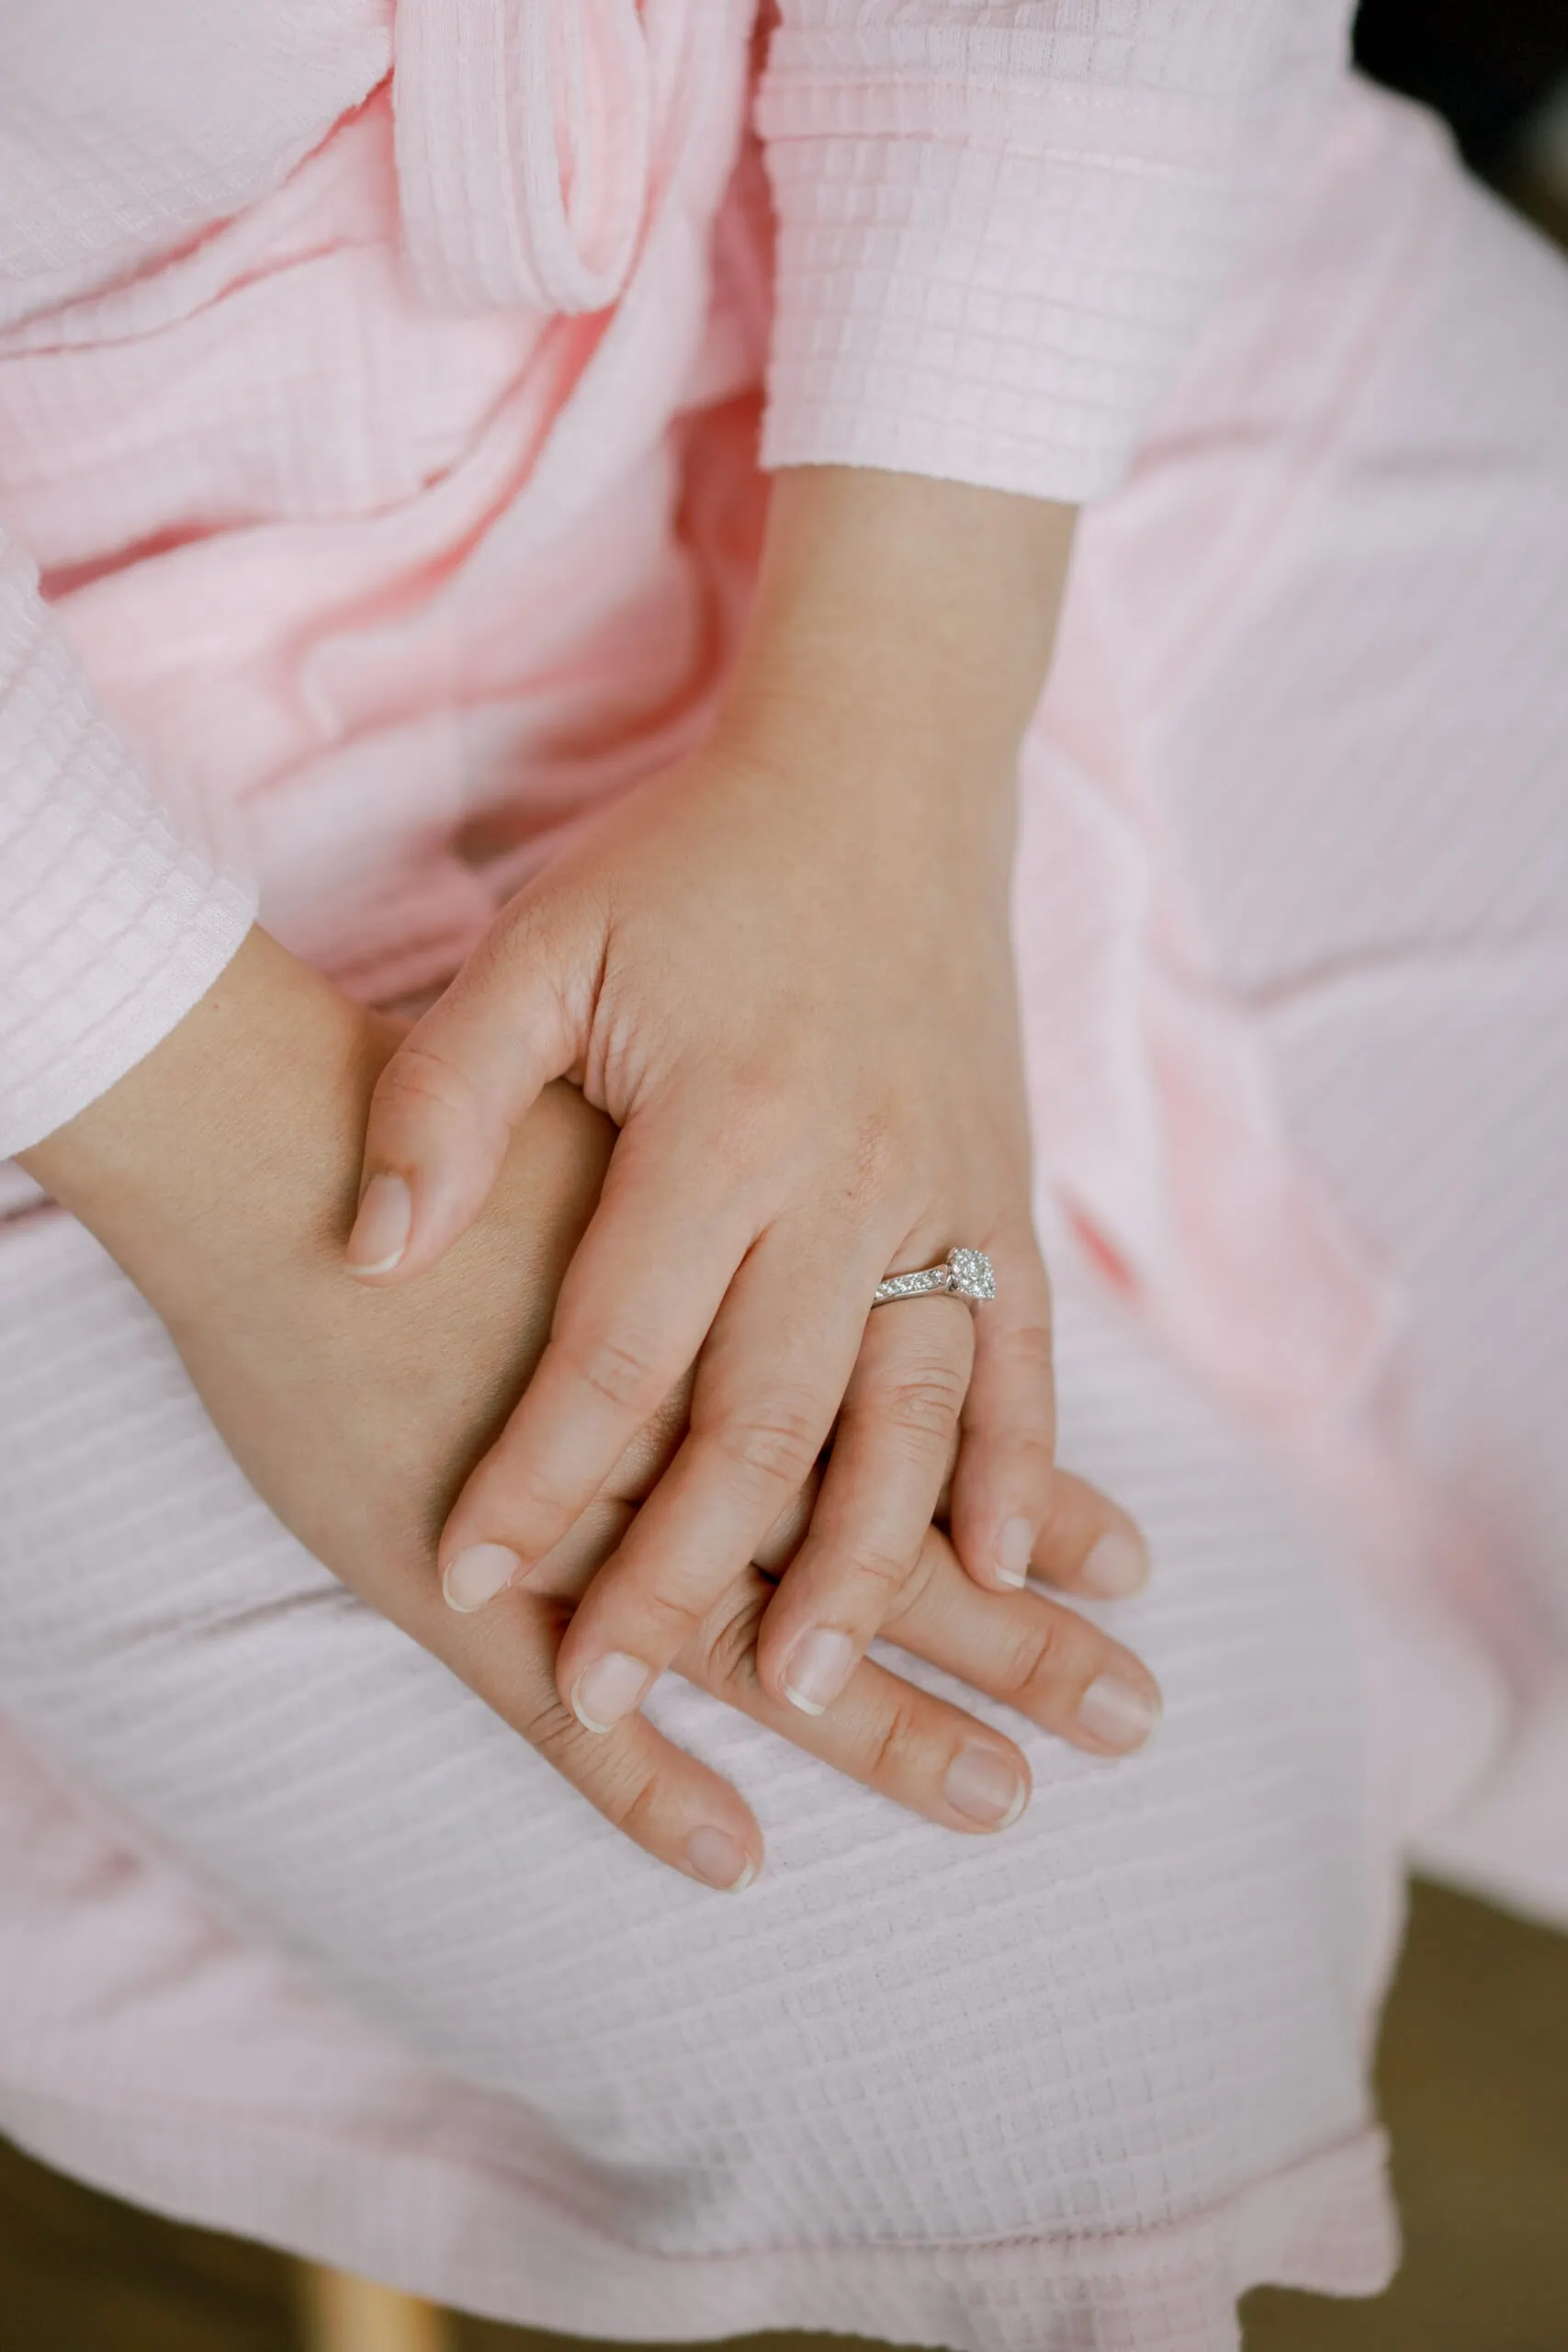 Queenstown New Zealand Elopement Wedding Photographer - A woman's hands holding a wedding ring at Lam and Wendy's Kamana Lakehouse Wedding.